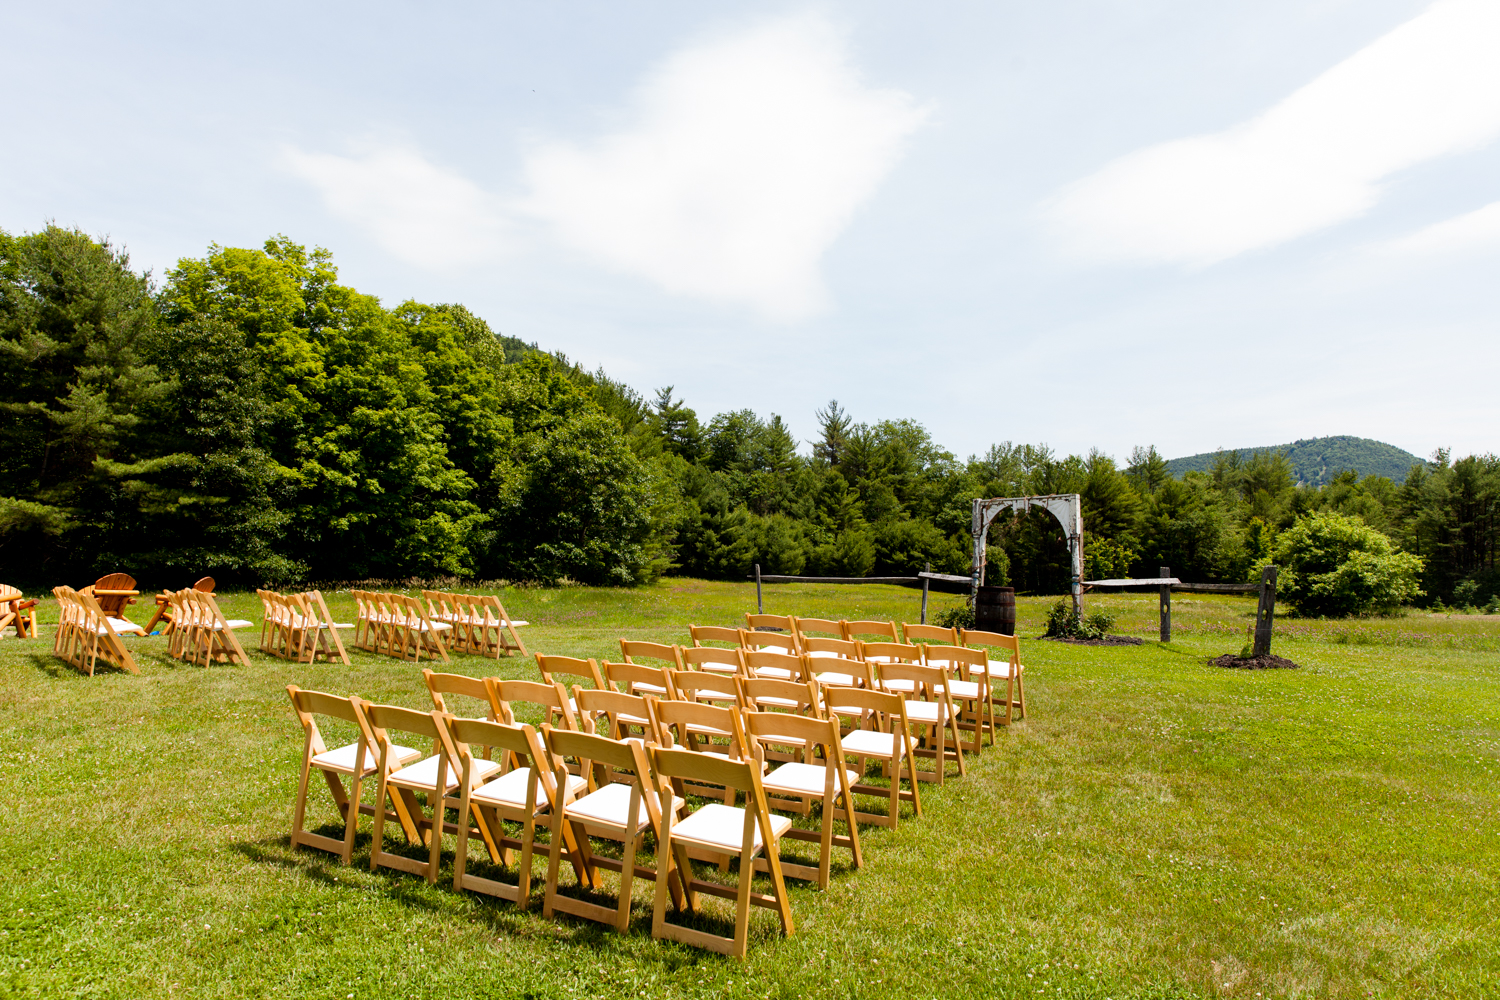  View of an Adirondacks ceremony site in upstate, NY 